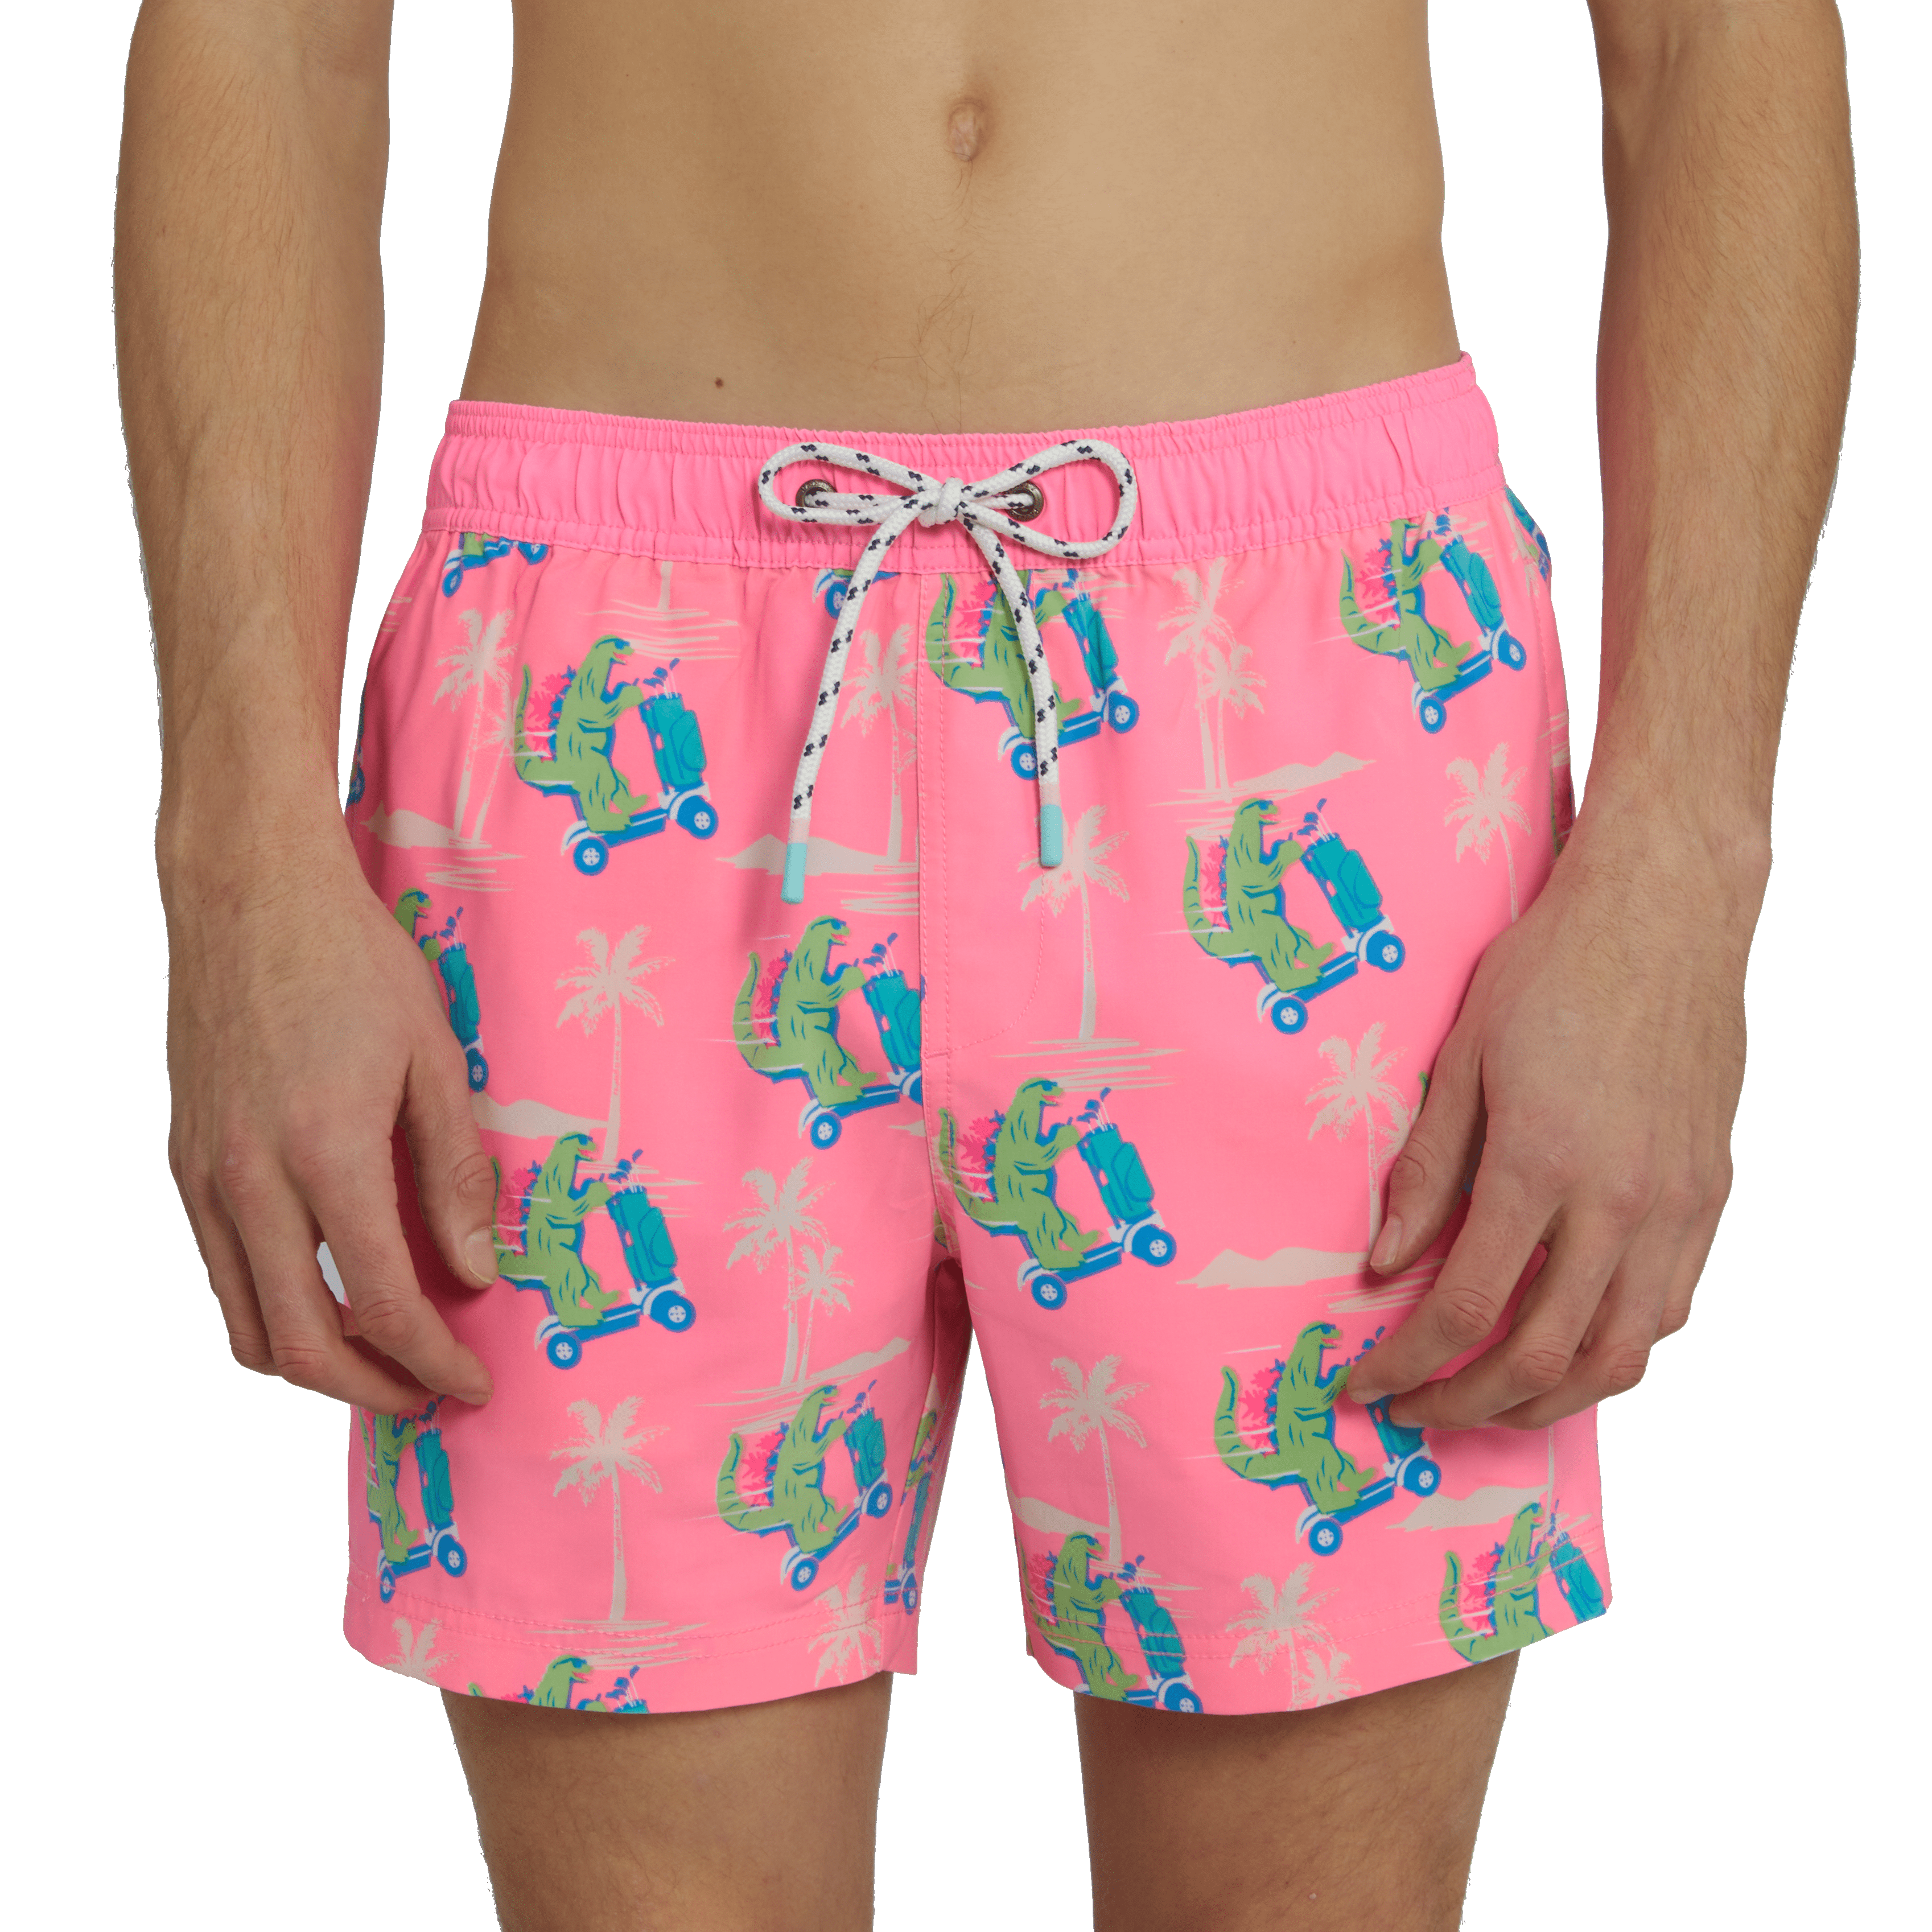 RIPPERS REVENGE PARTY STARTER SHORT - PINK PARTY STARTER SHORTS PARTY PANTS 